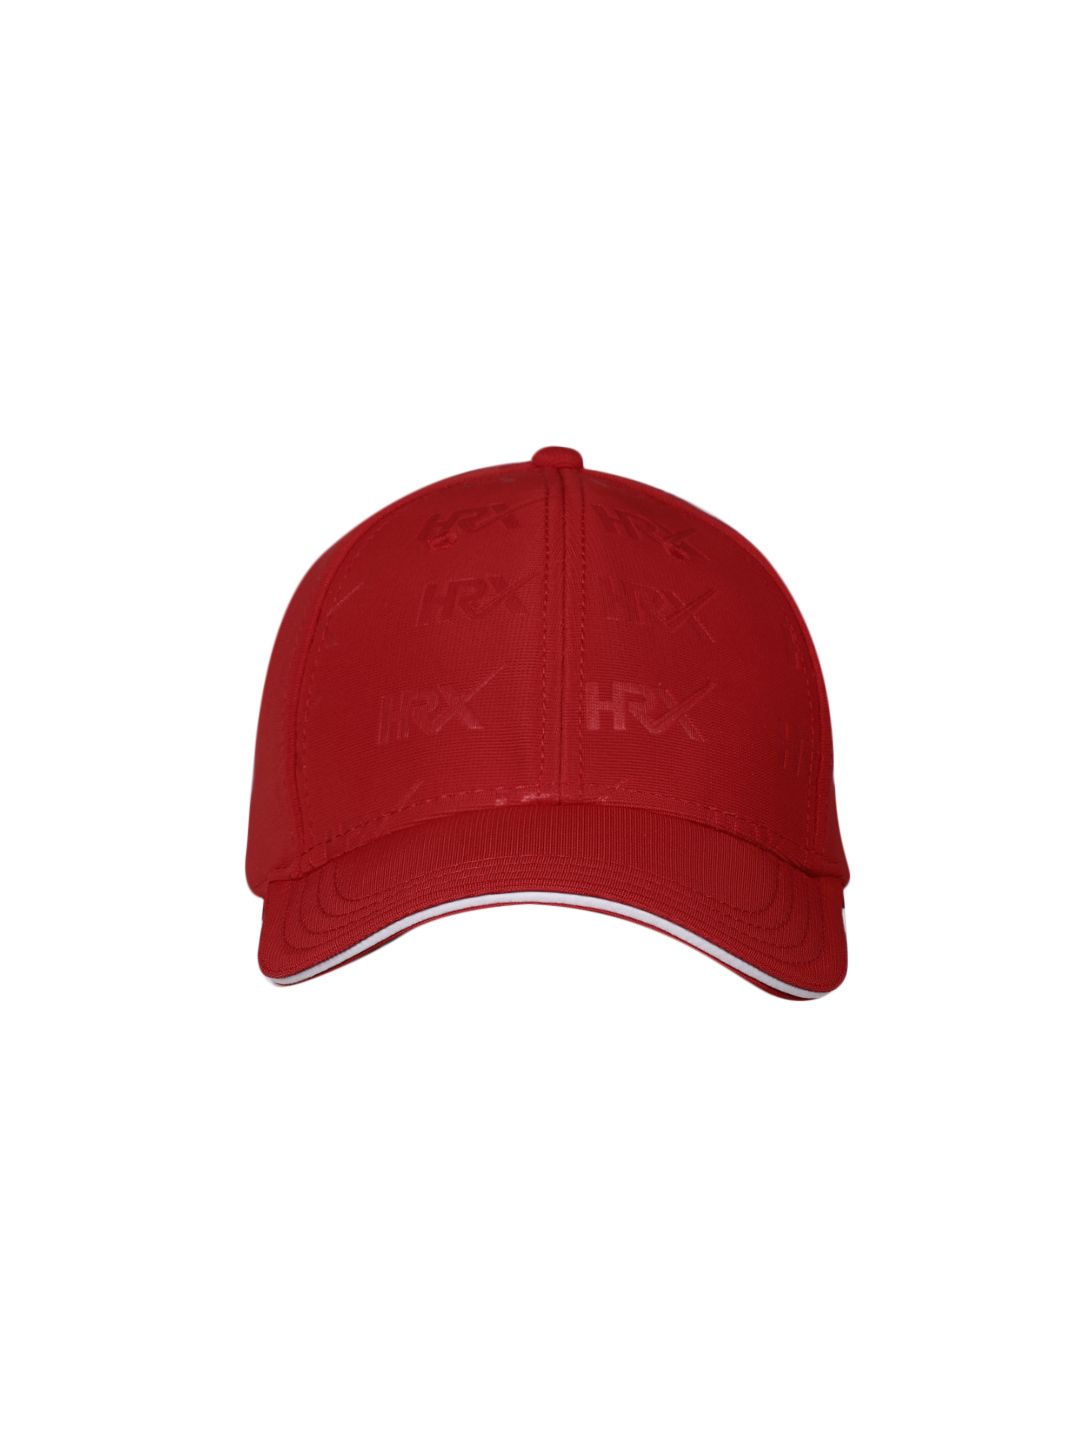 HRX by Hrithik Roshan Unisex Red Solid Baseball Cap Price in India